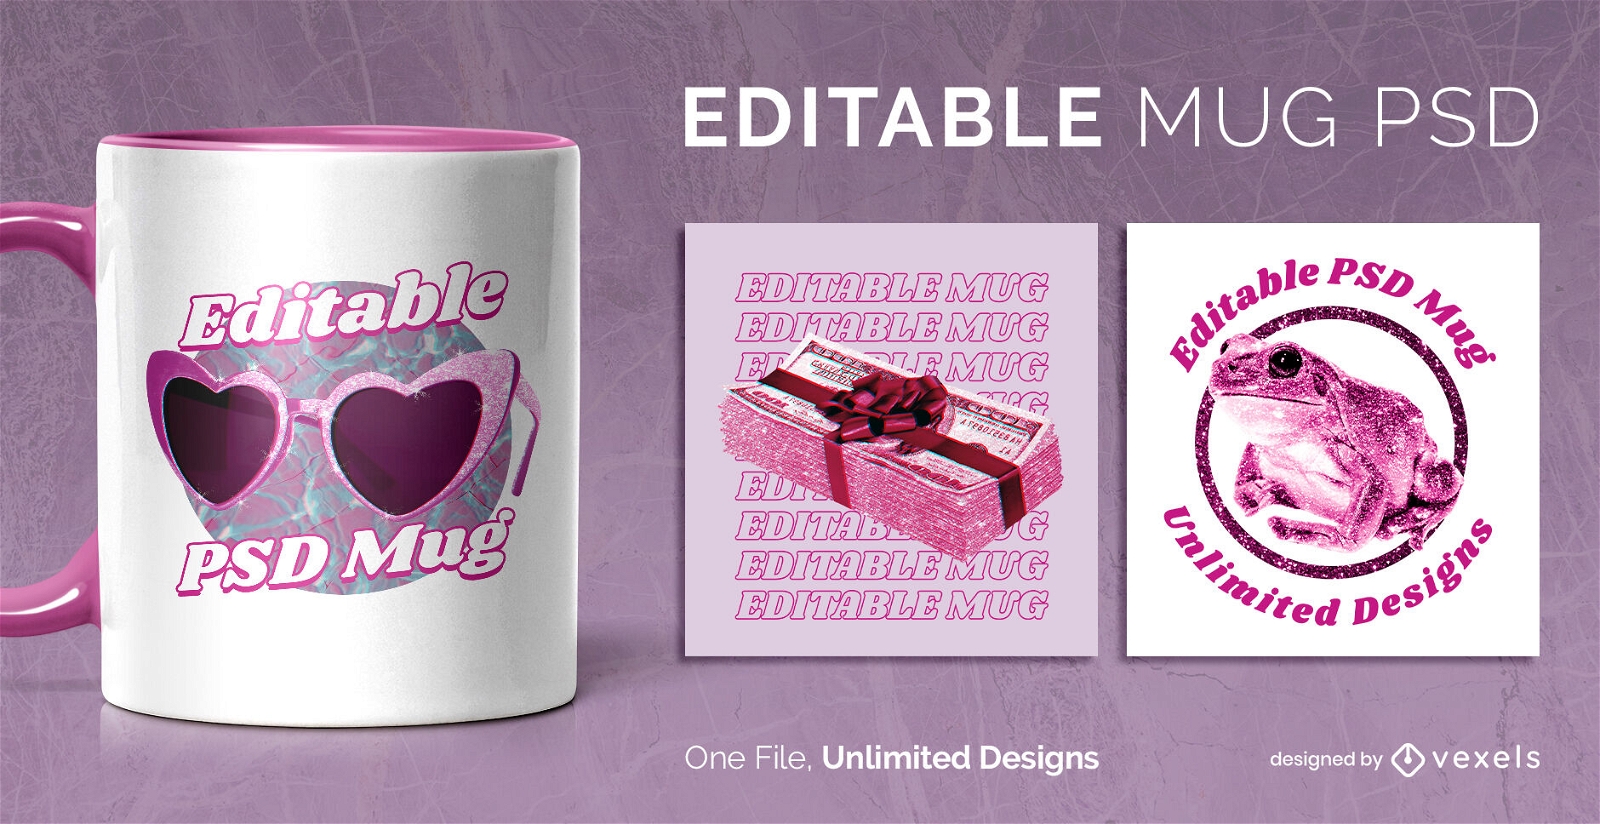 https://images.vexels.com/content/327737/preview/pink-glitter-elements-scalable-mug-template-0e605c.png